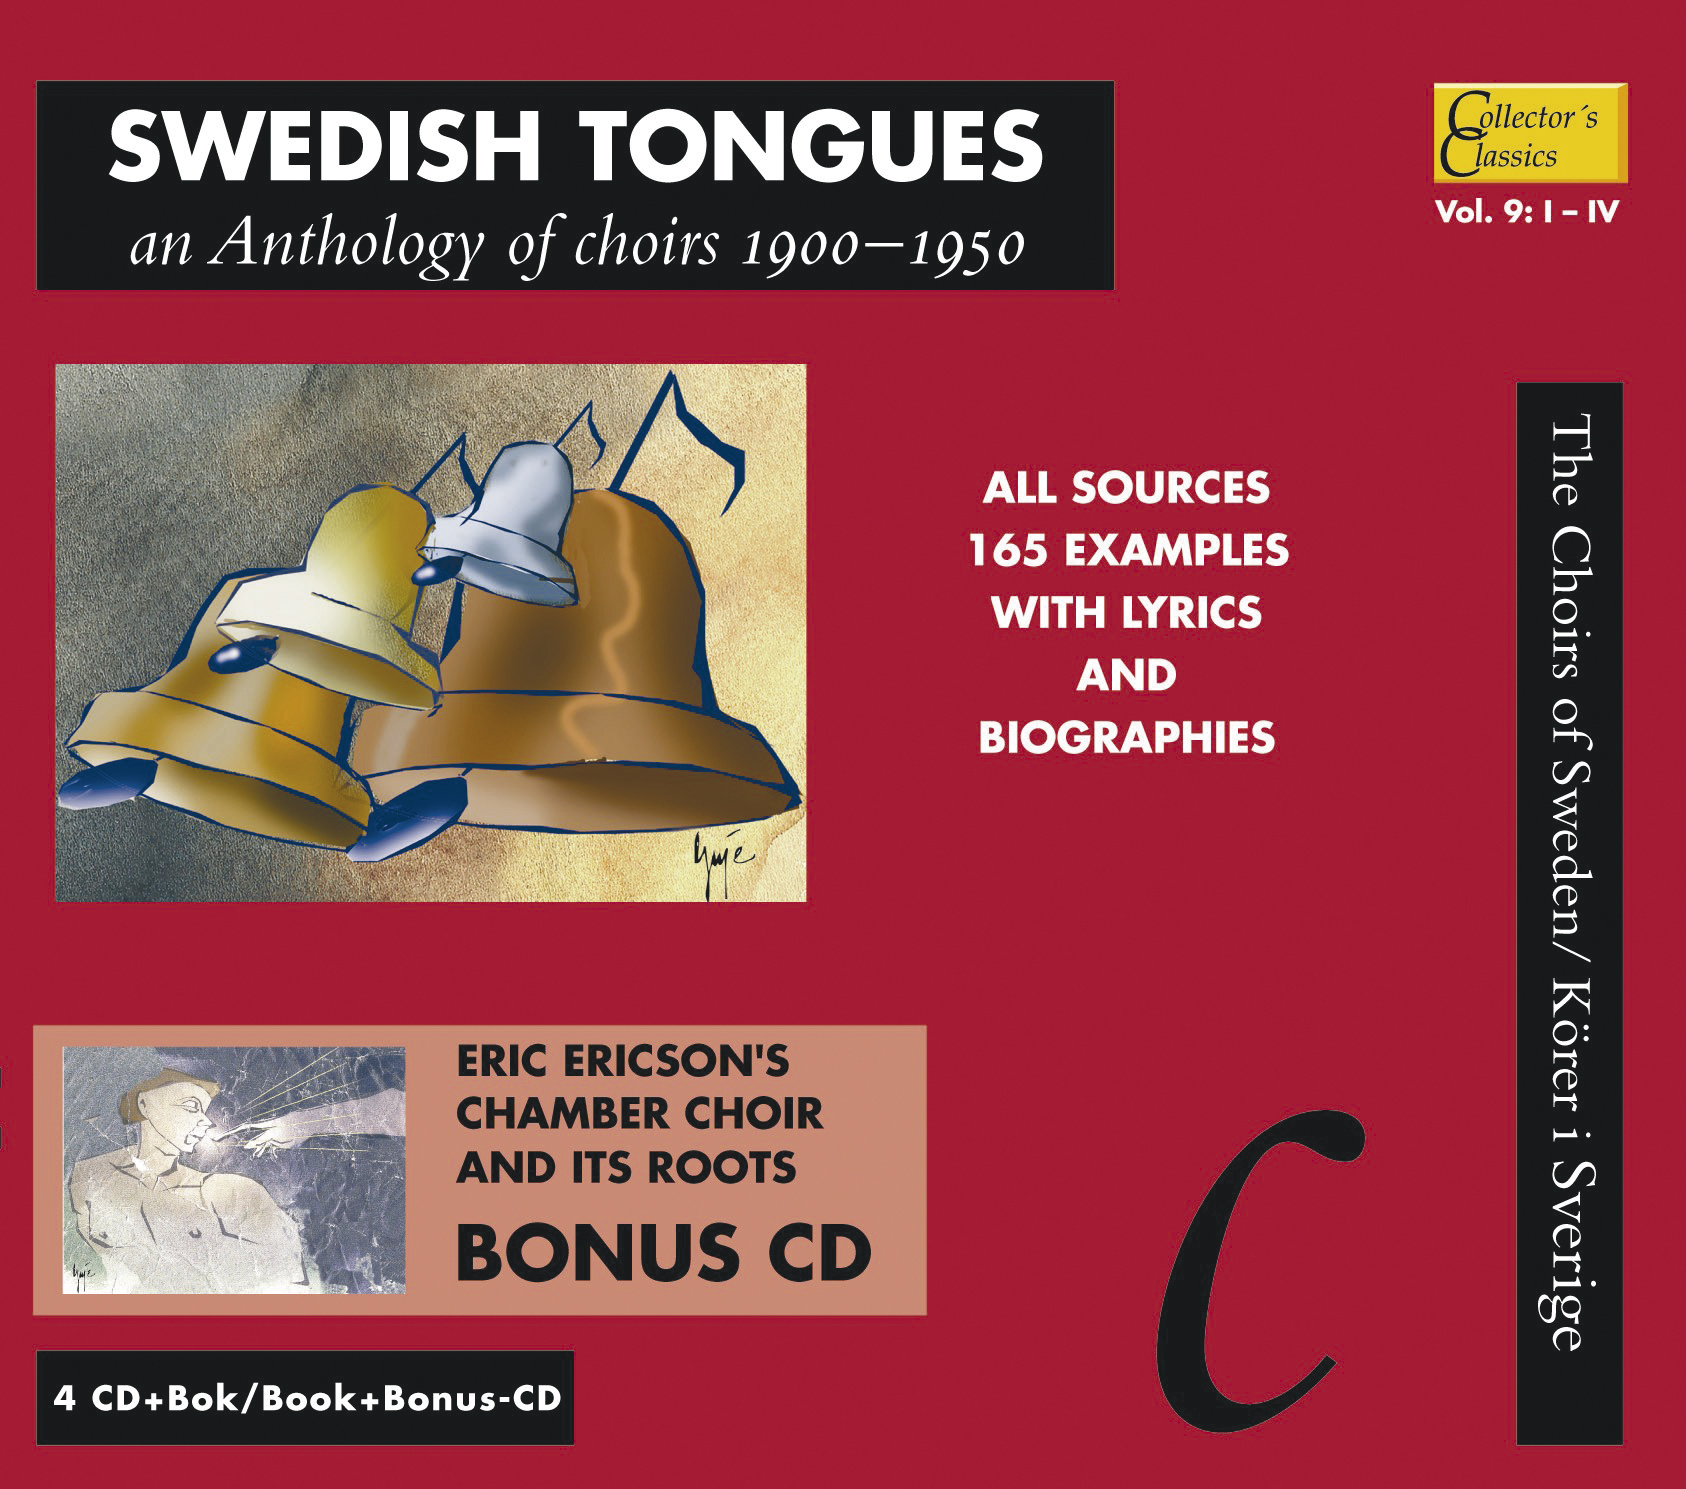 Swedish Tongues, an Anthology of choirs vol. 9